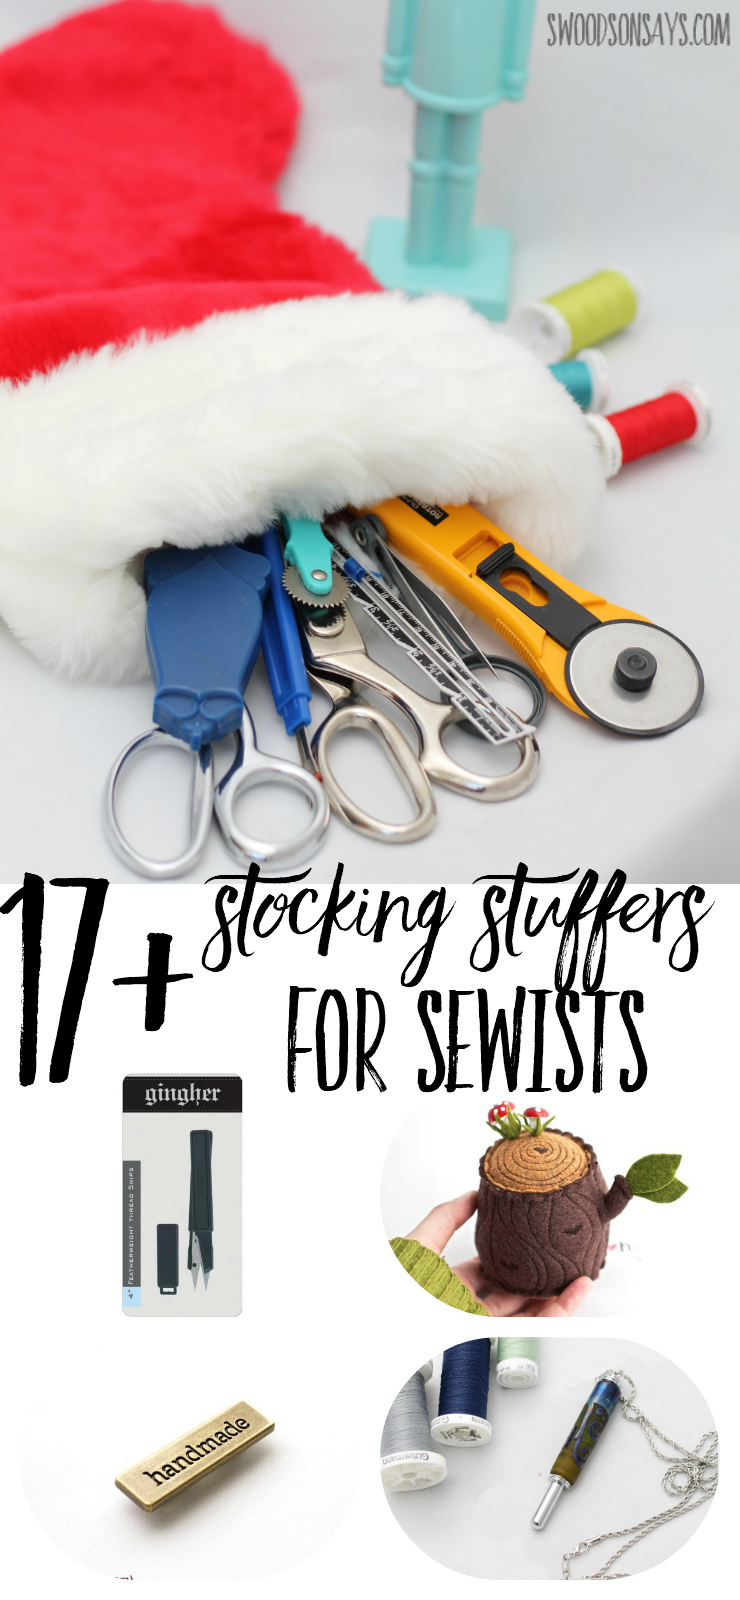 It can be hard to guess someone's fabric taste or pattern wishes, but there are lots of nifty gadges that fit perfectly in a stocking! See this list of sewing stocking stuffers and find something unique for all the sewists in your life. #sewing #stockingstuffer #giftguide